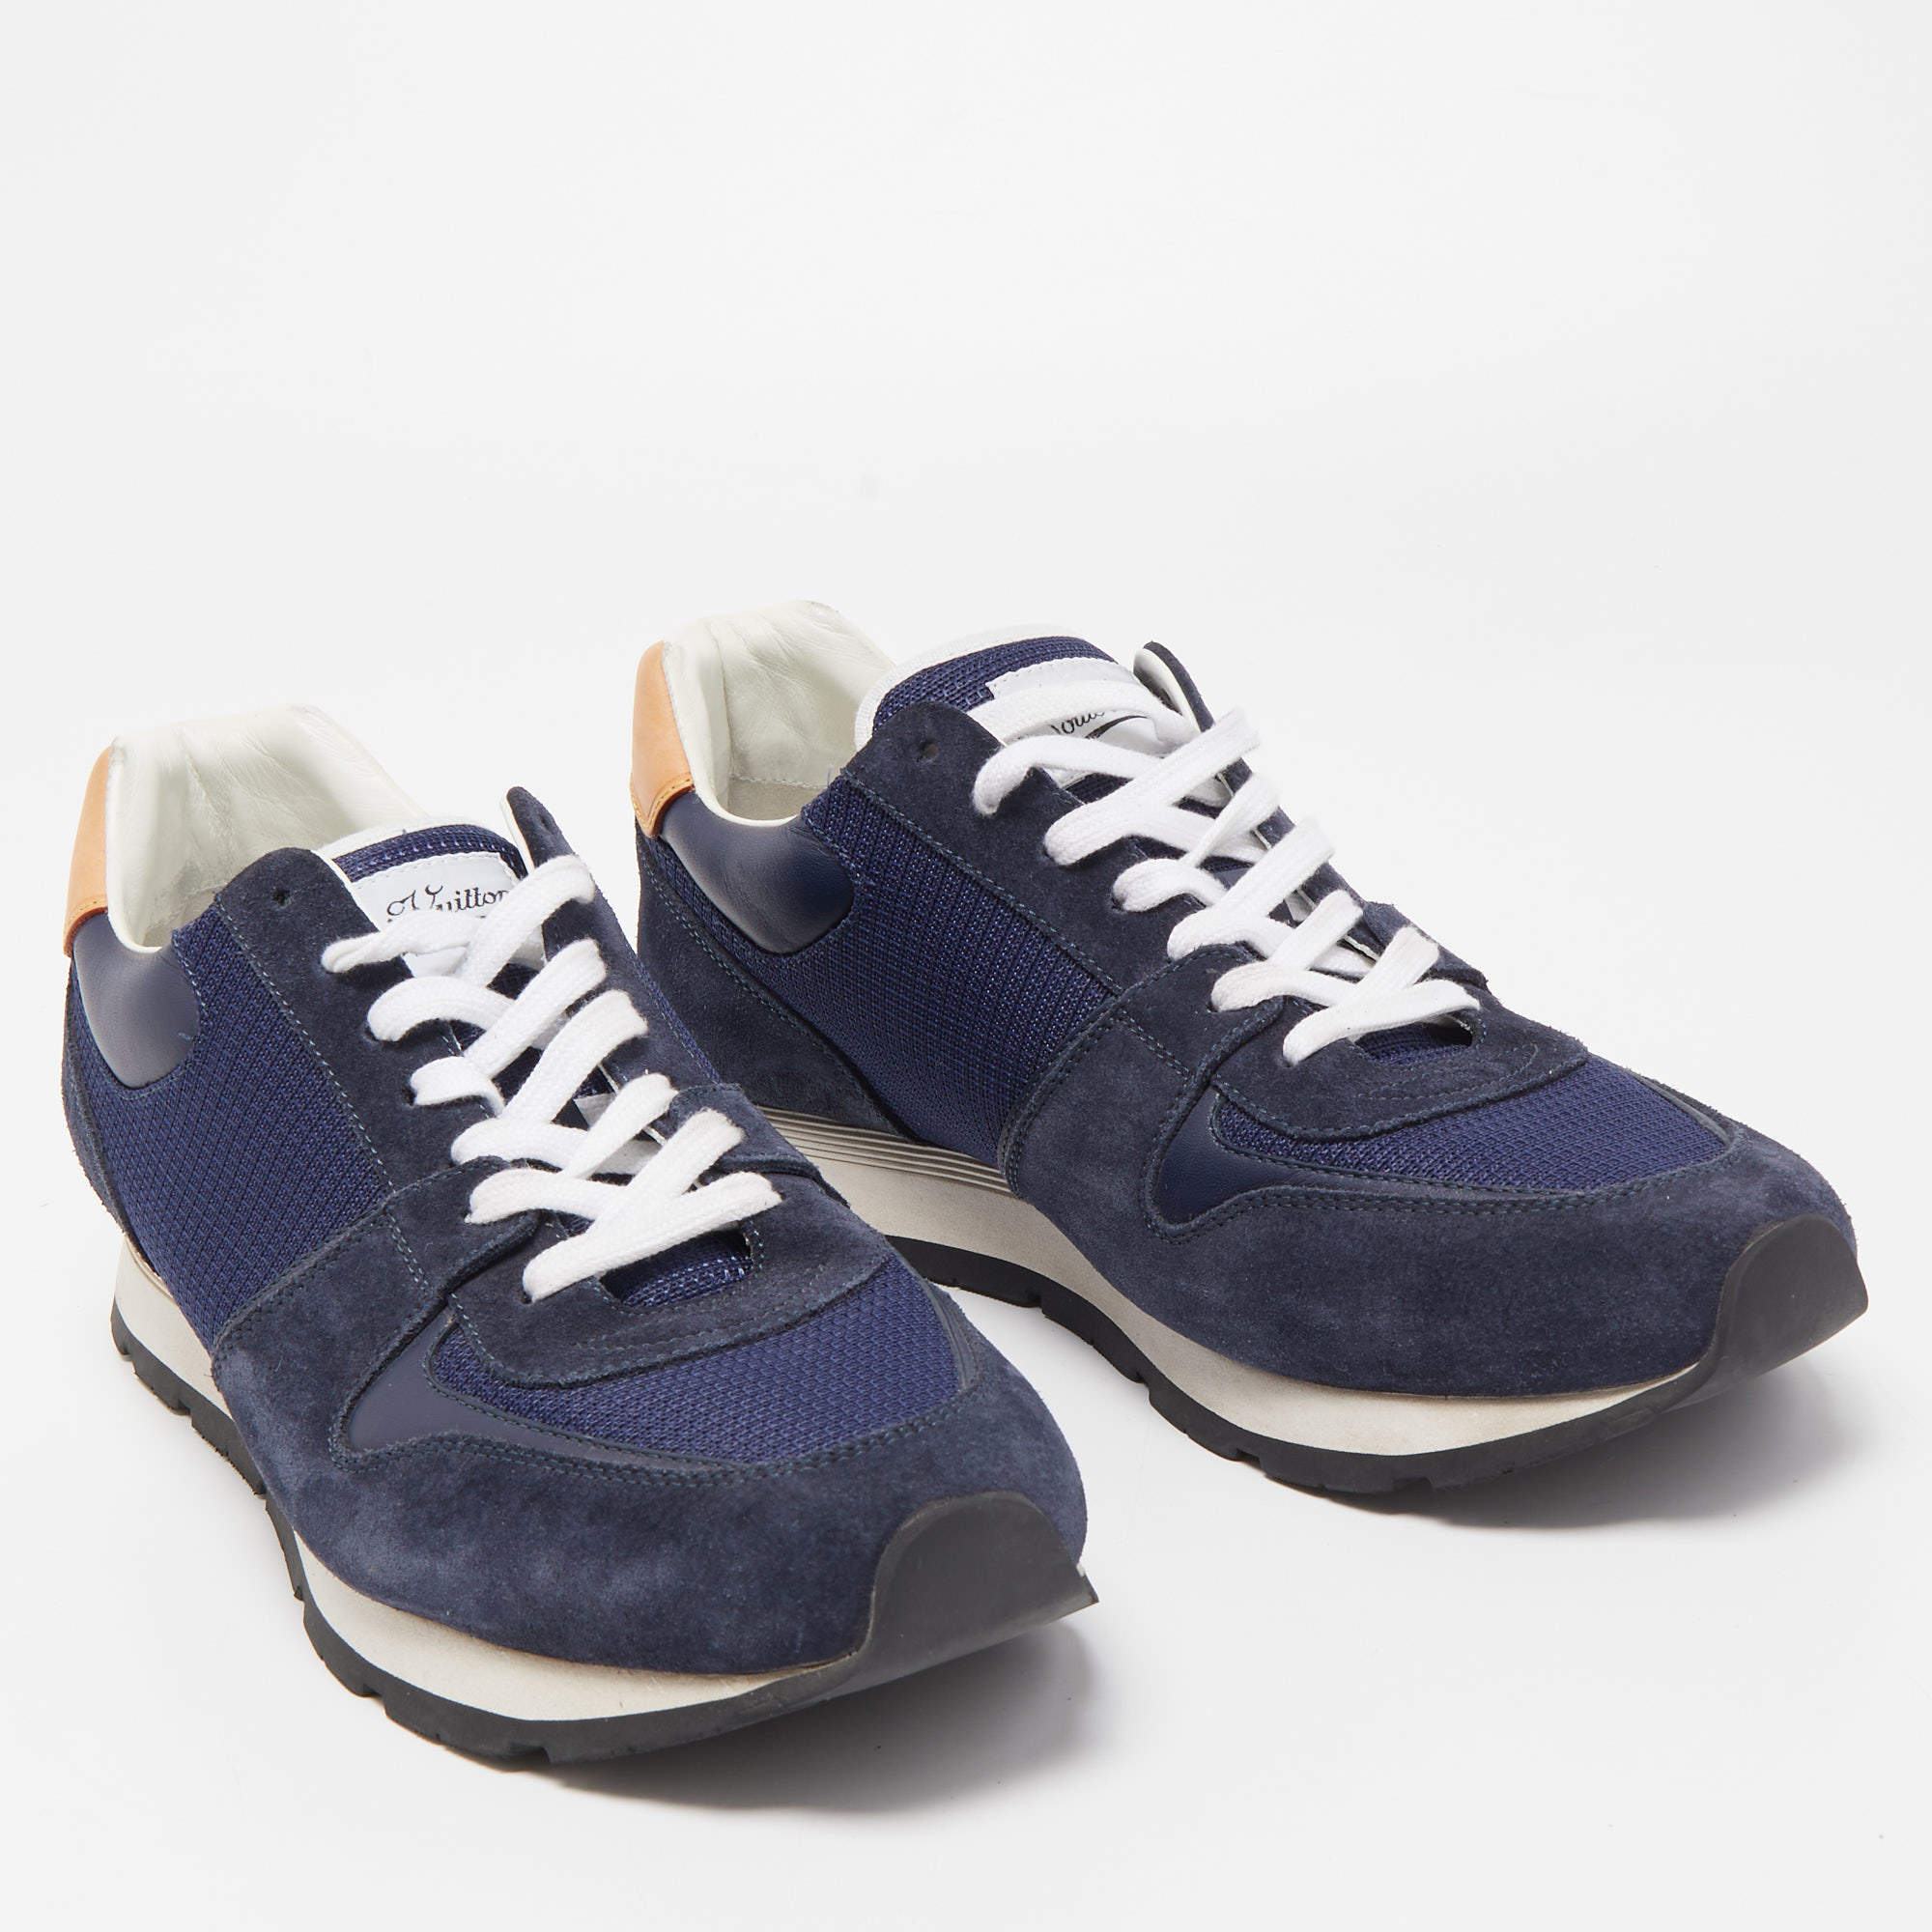 Louis Vuitton Men's Navy Blue Abbesses Suede Sneakers Trainers